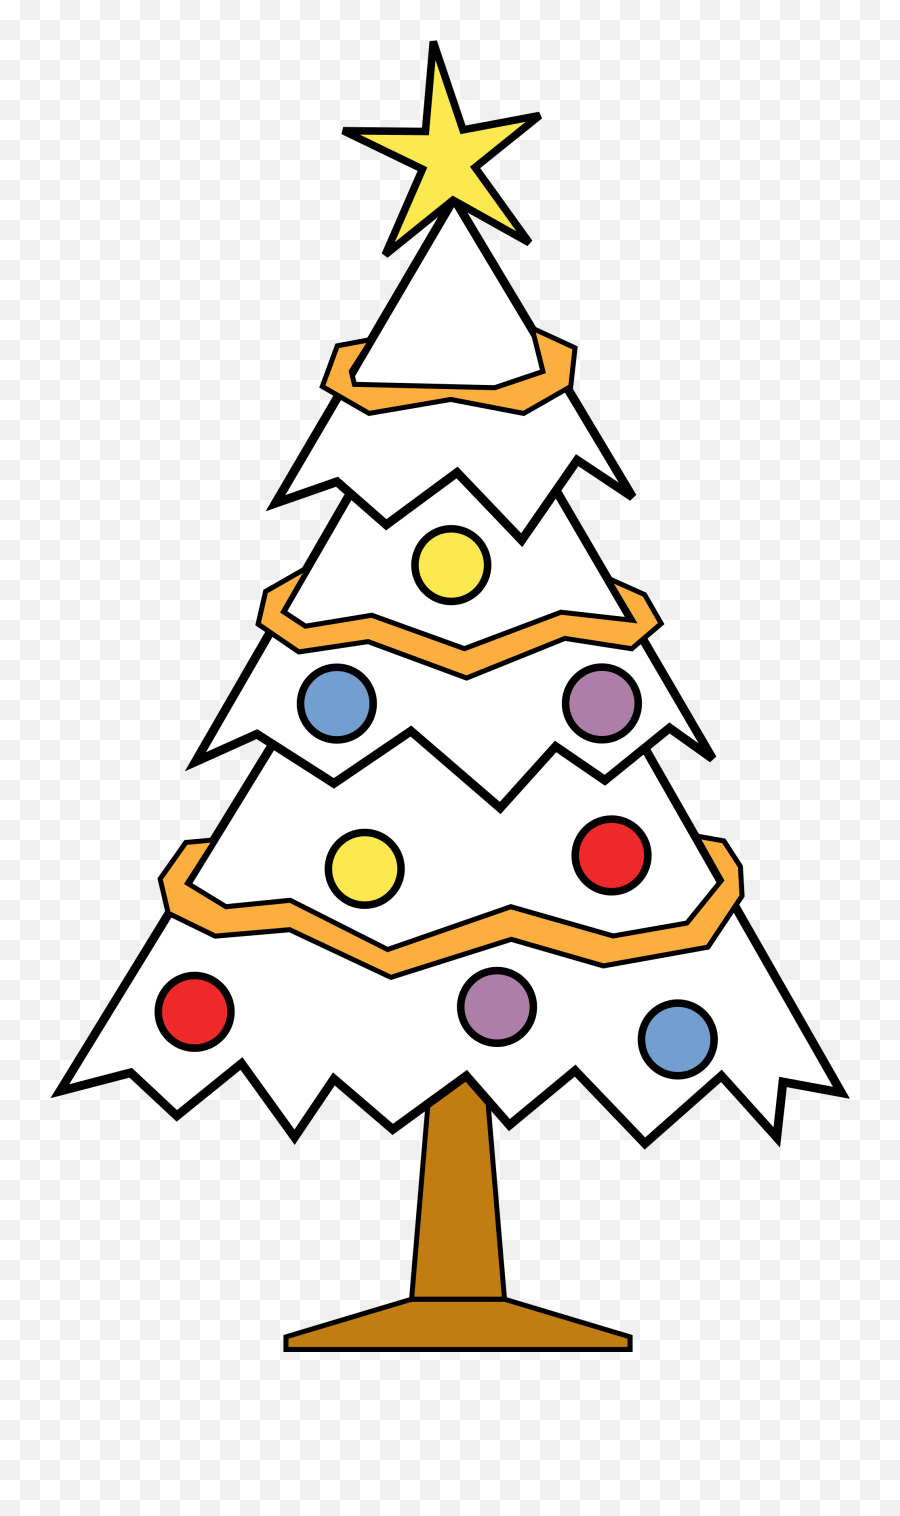 Library Of Black And White Image Transparent Download - Decorated Christmas Tree Outline Emoji,Christmas Tree Emoji Png